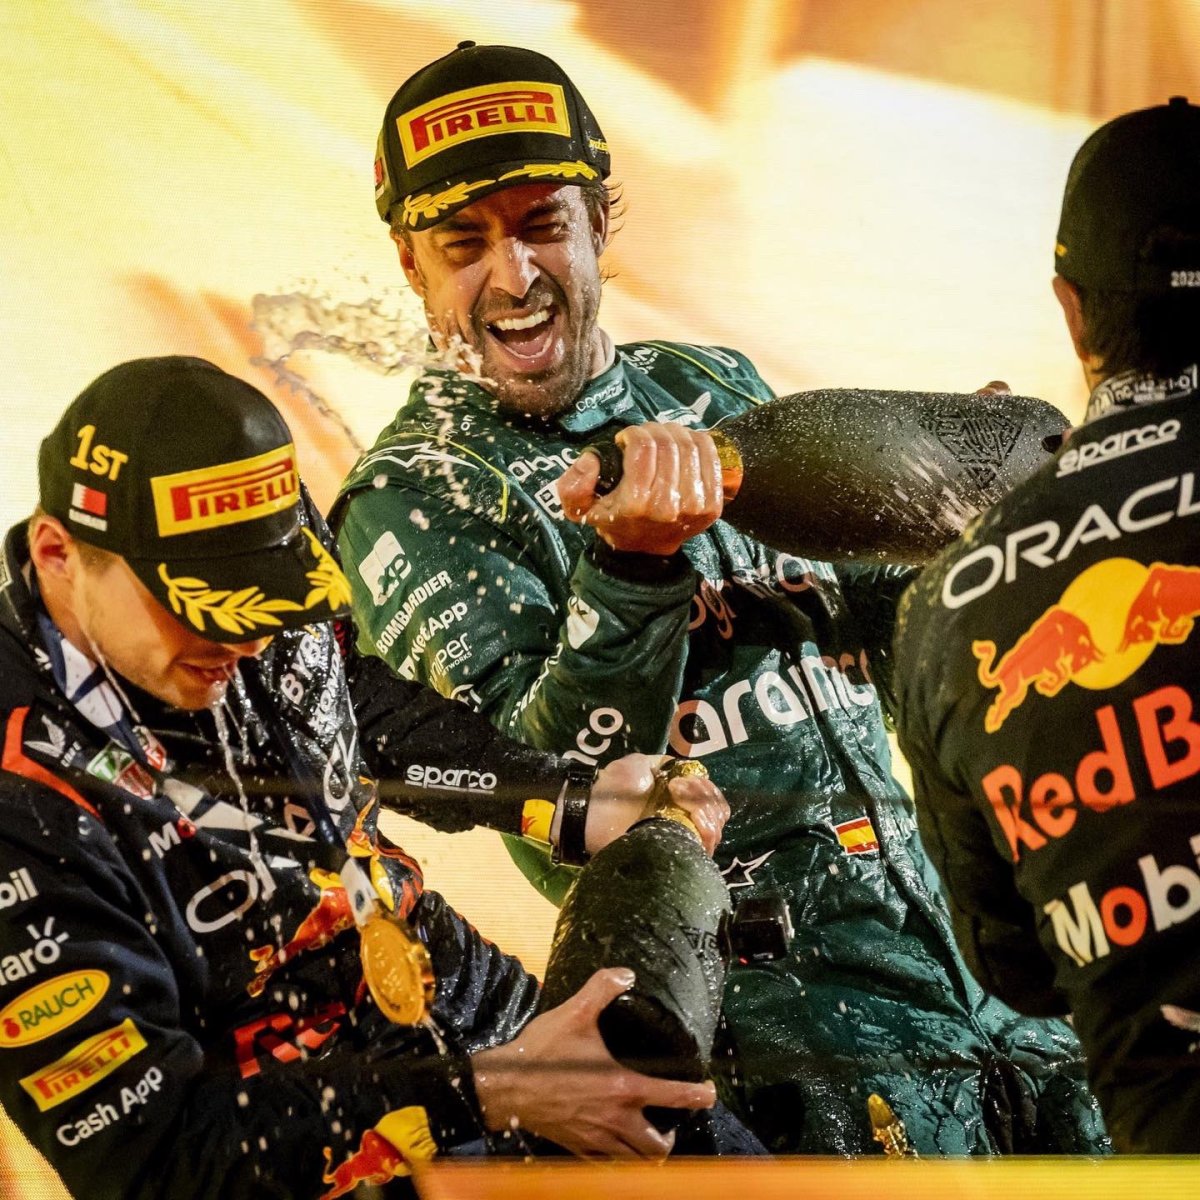 F1 News: Fernando Alonso's Aston Martin Podium Finish Just Made Lawrence  Stroll A Lot Of Money - F1 Briefings: Formula 1 News, Rumors, Standings and  More